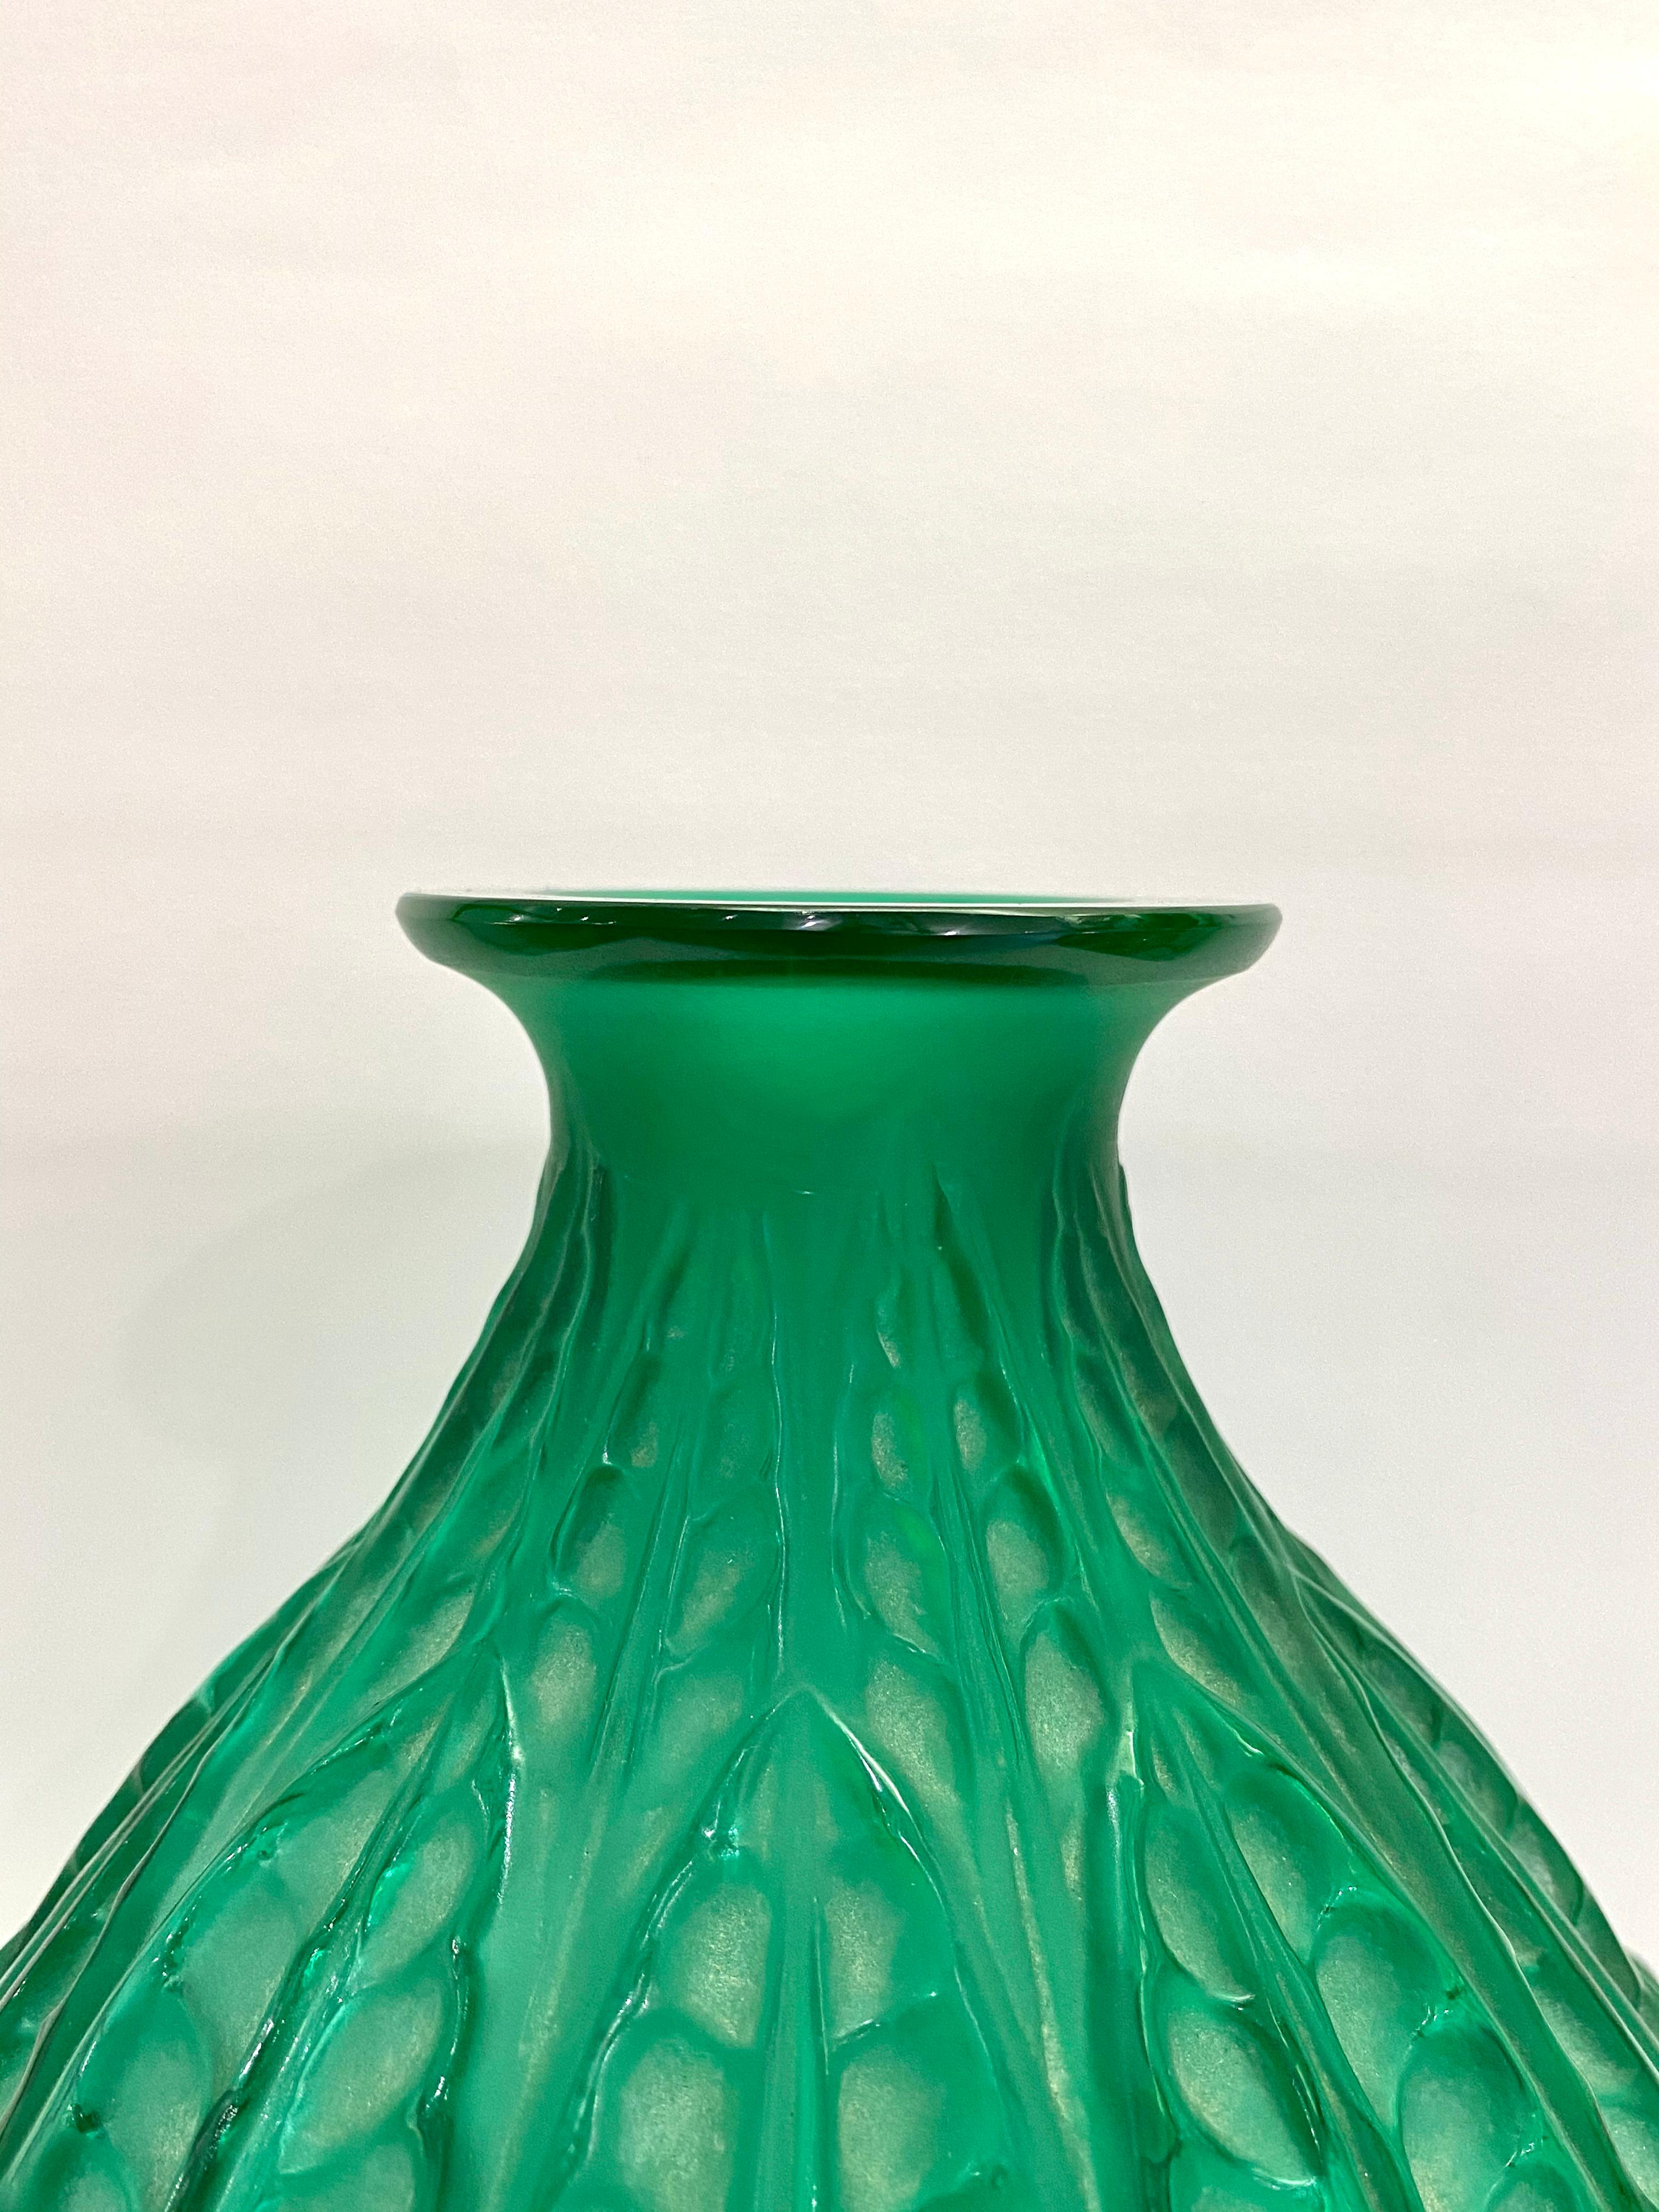 French 1927 René Lalique Malesherbes Vase in Emerald Green Glass Leaves